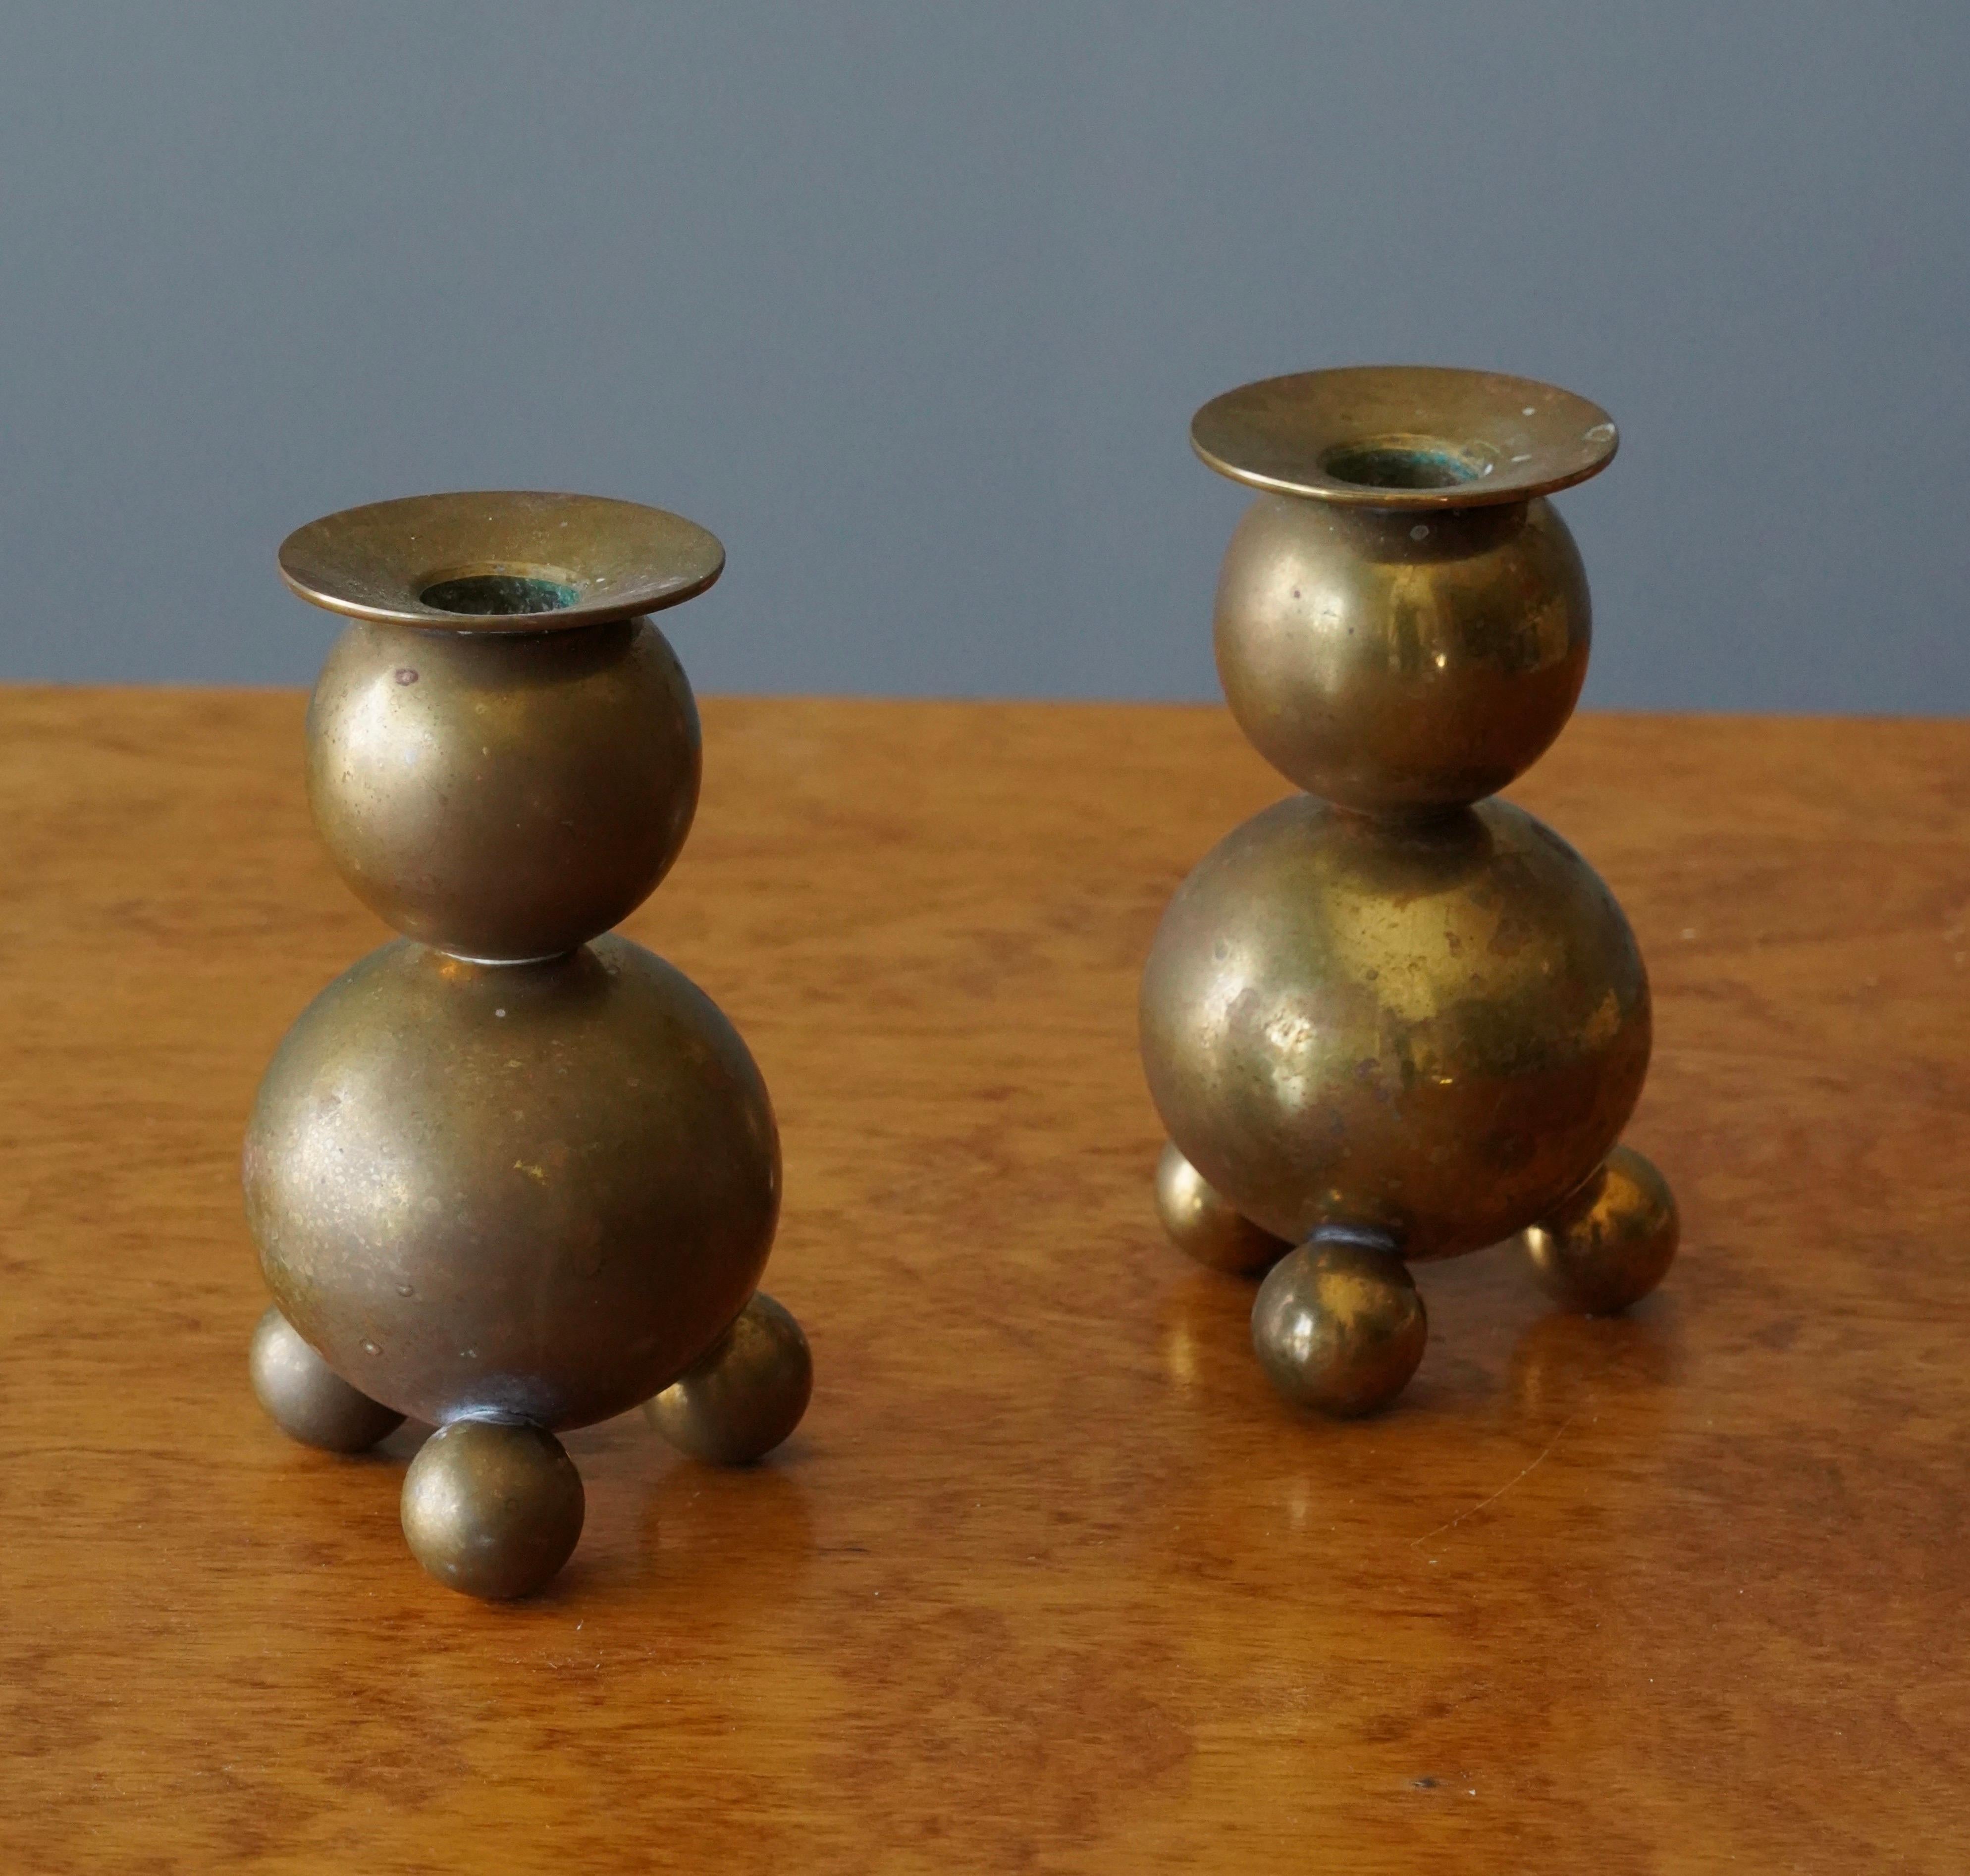 A pair of candle holders. Design and production by Metallslöjden Gusums Bruk, Sweden. In heavy alloy brass.